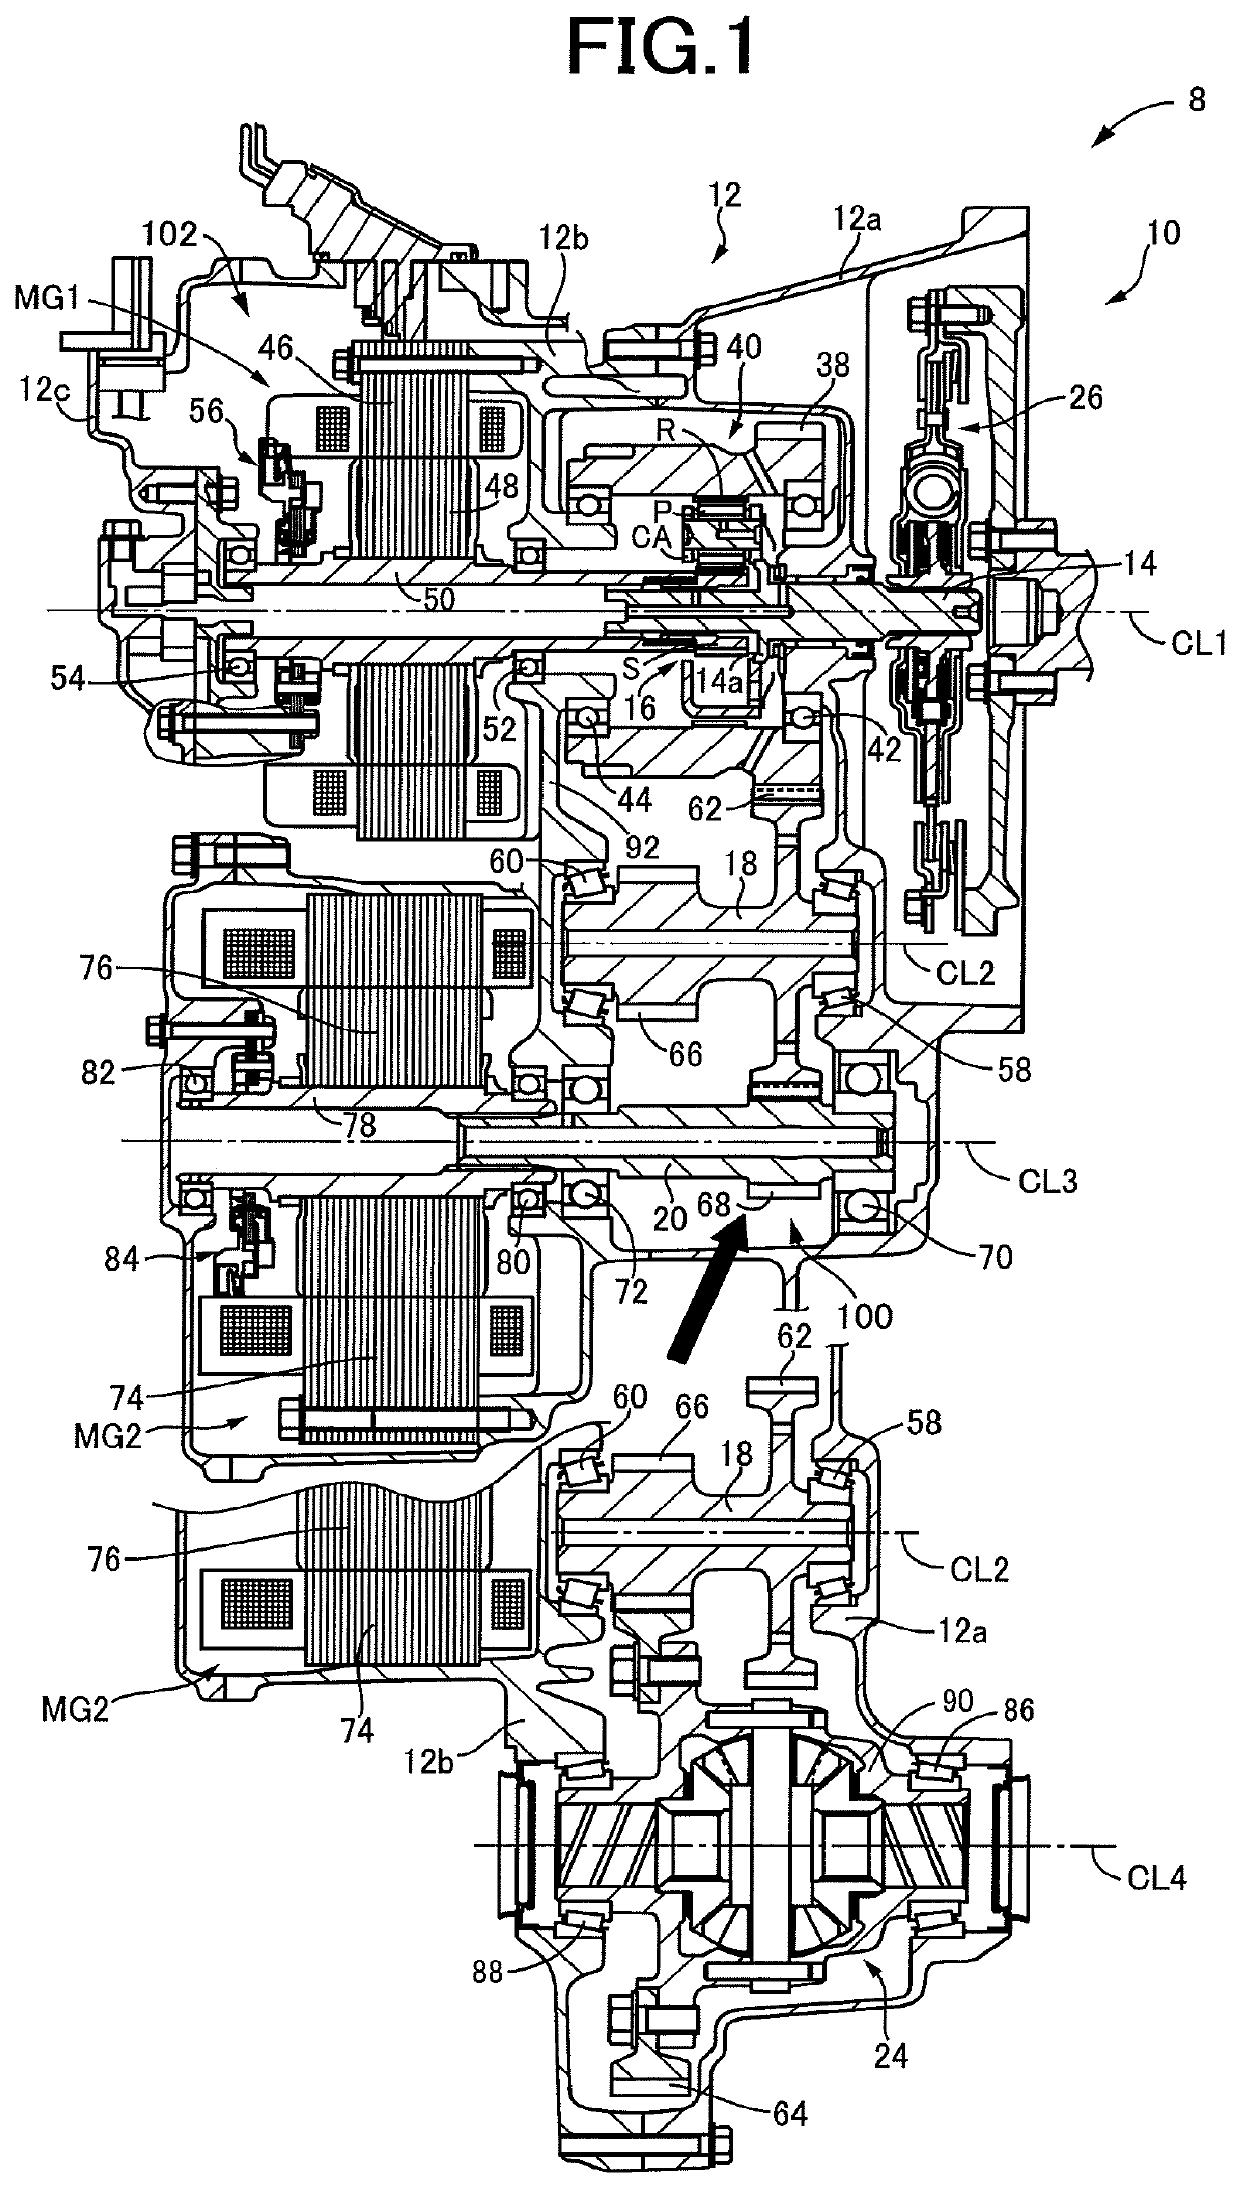 Lubricating device for components within casing structure of vehicular power transmitting system